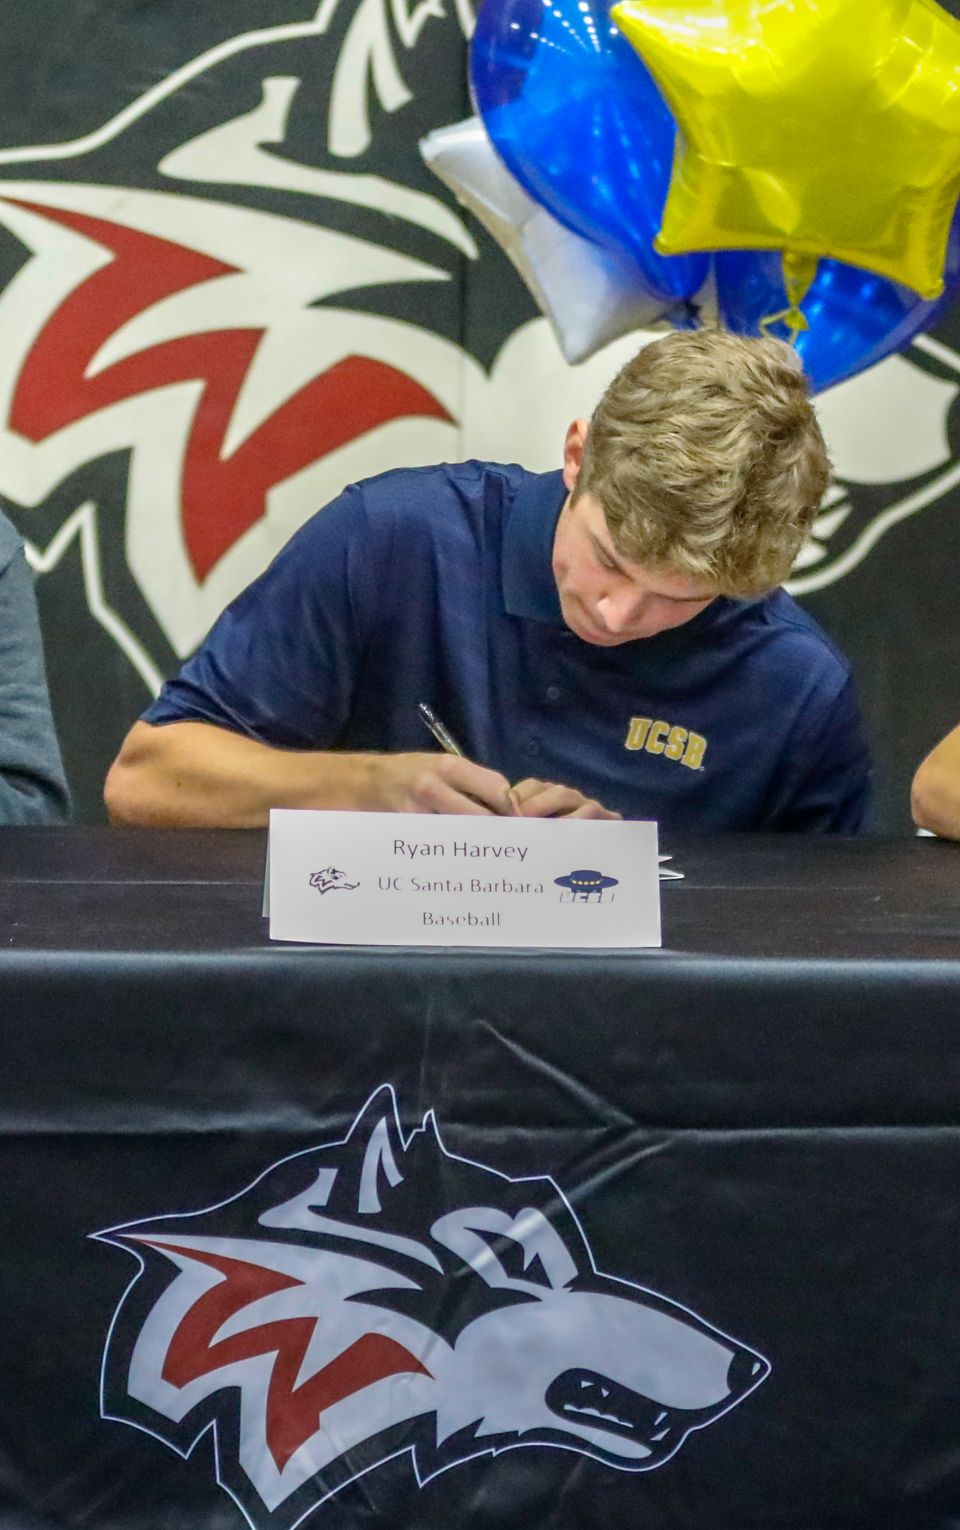 New York Yankees pitcher Ryan Harvey signs his letter of intent to the University of California, Santa Barbara, on Nov. 4, 2018, at Woodcreek High School in Roseville. Photo courtesy of Allene Salerno/Lenie’s Pictures ™ (leniespictures.smugmug.com)